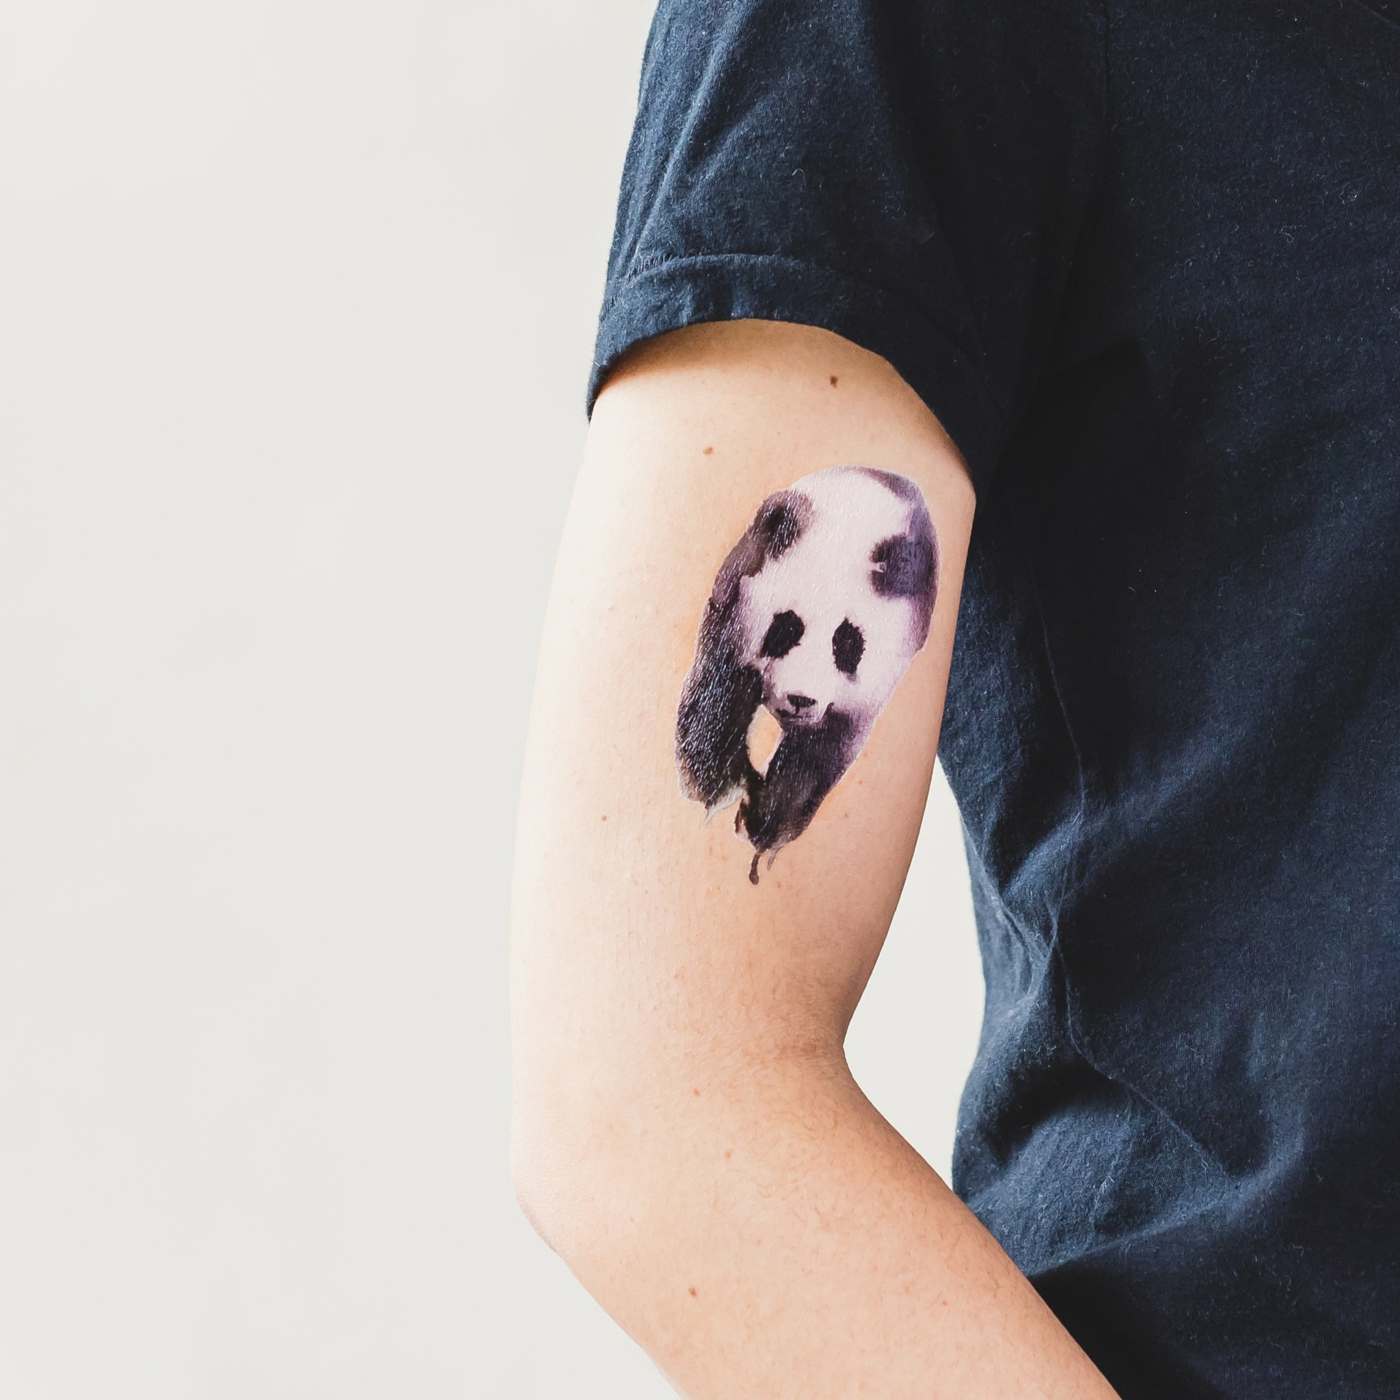 The panda bar as a temporary tattoo in black and white